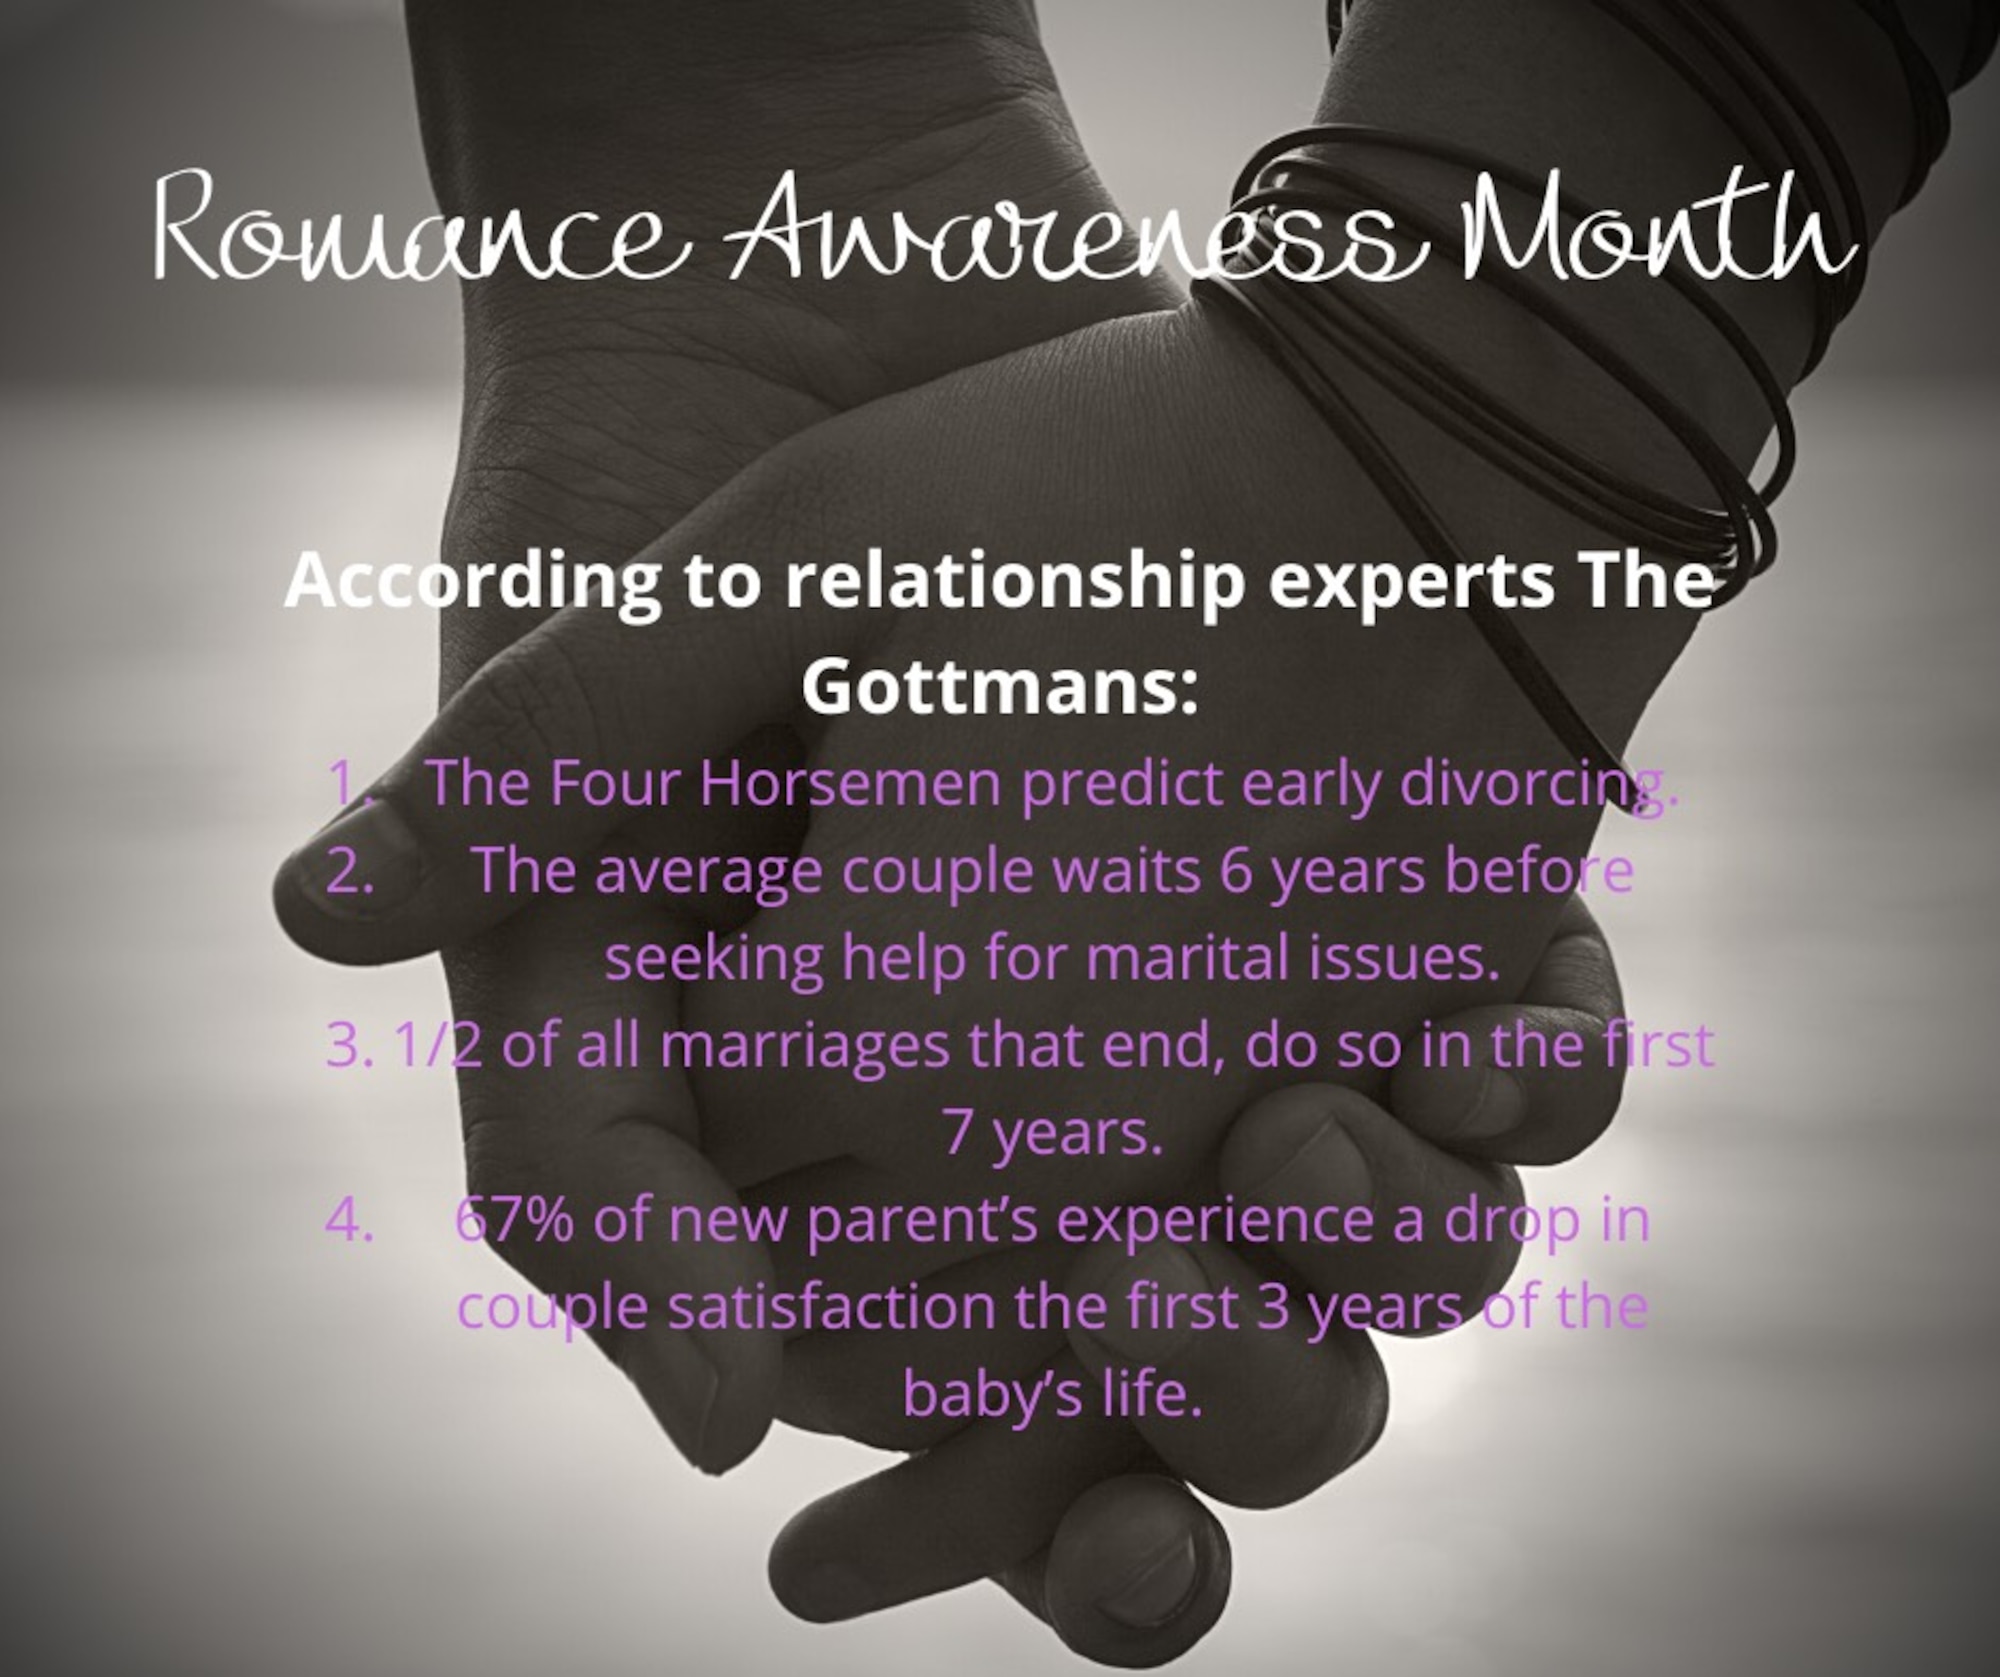 A graphic for Romance Awareness Month.